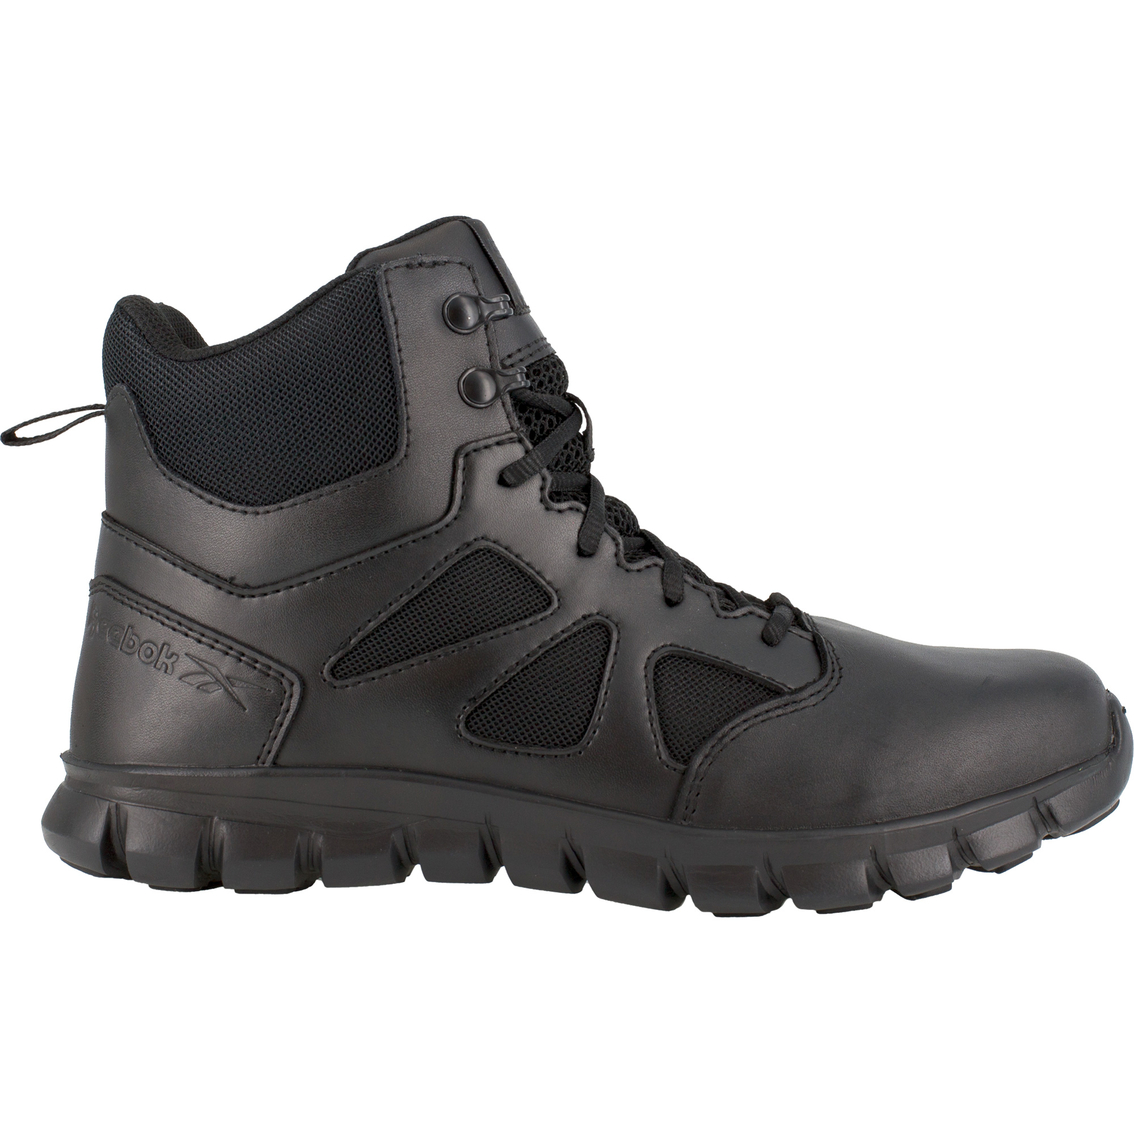 Reebok Sublite Cushion 6 in. Tactical Boots - Image 2 of 4